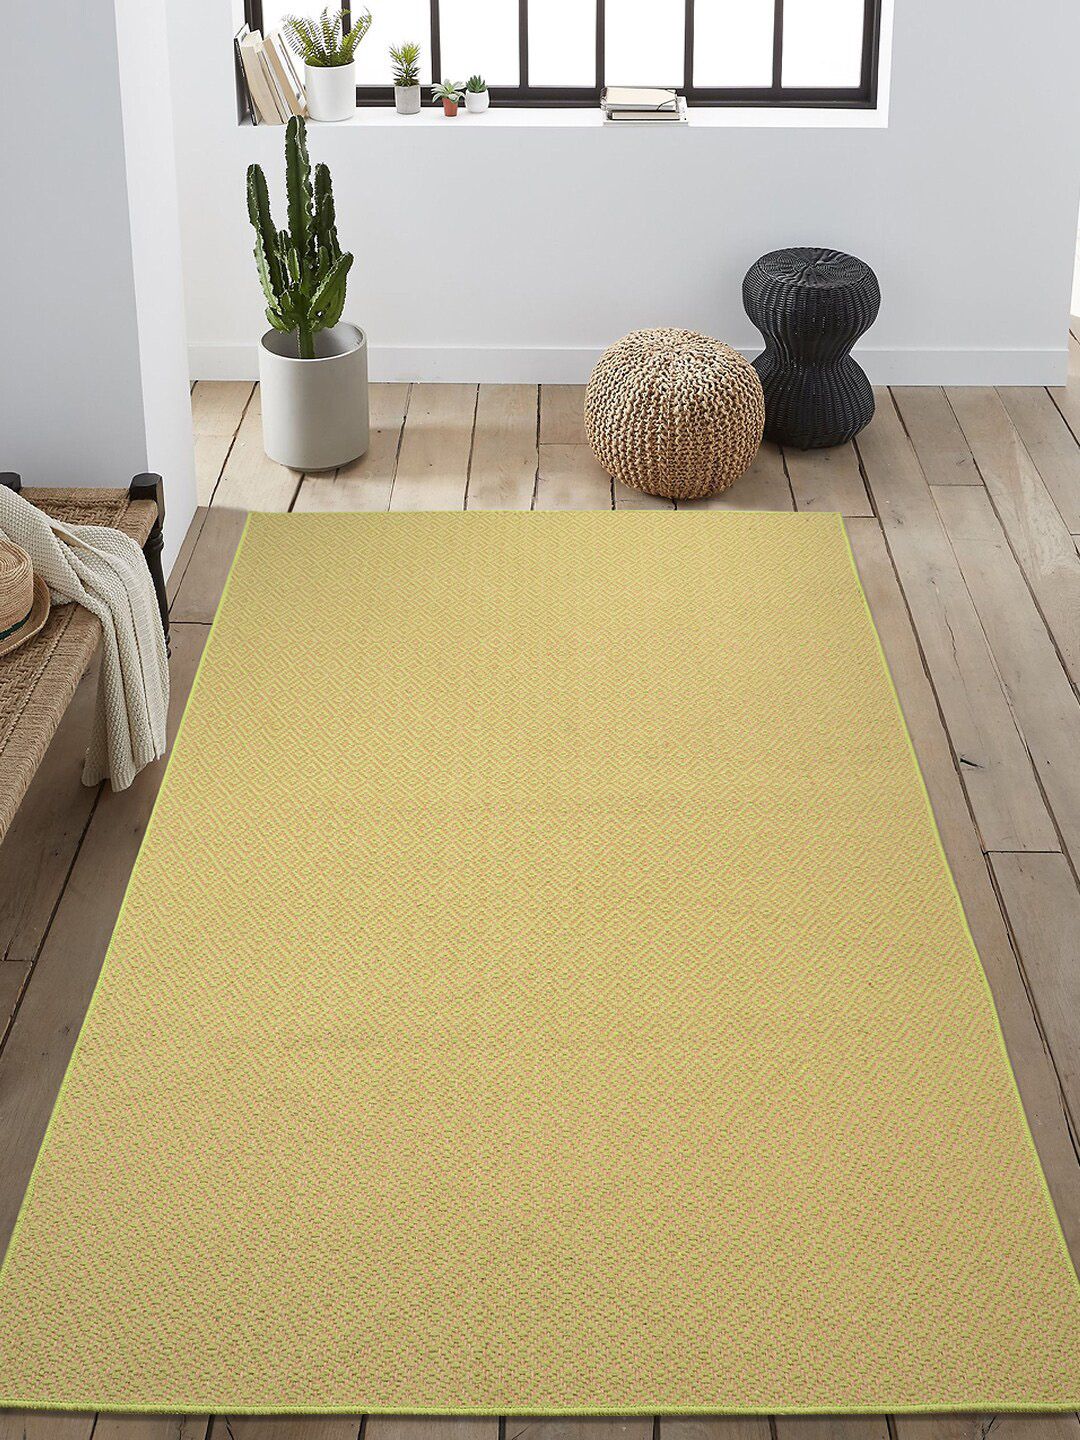 Saral Home Green & Beige Woven-Design Anti-Skid Carpet Price in India